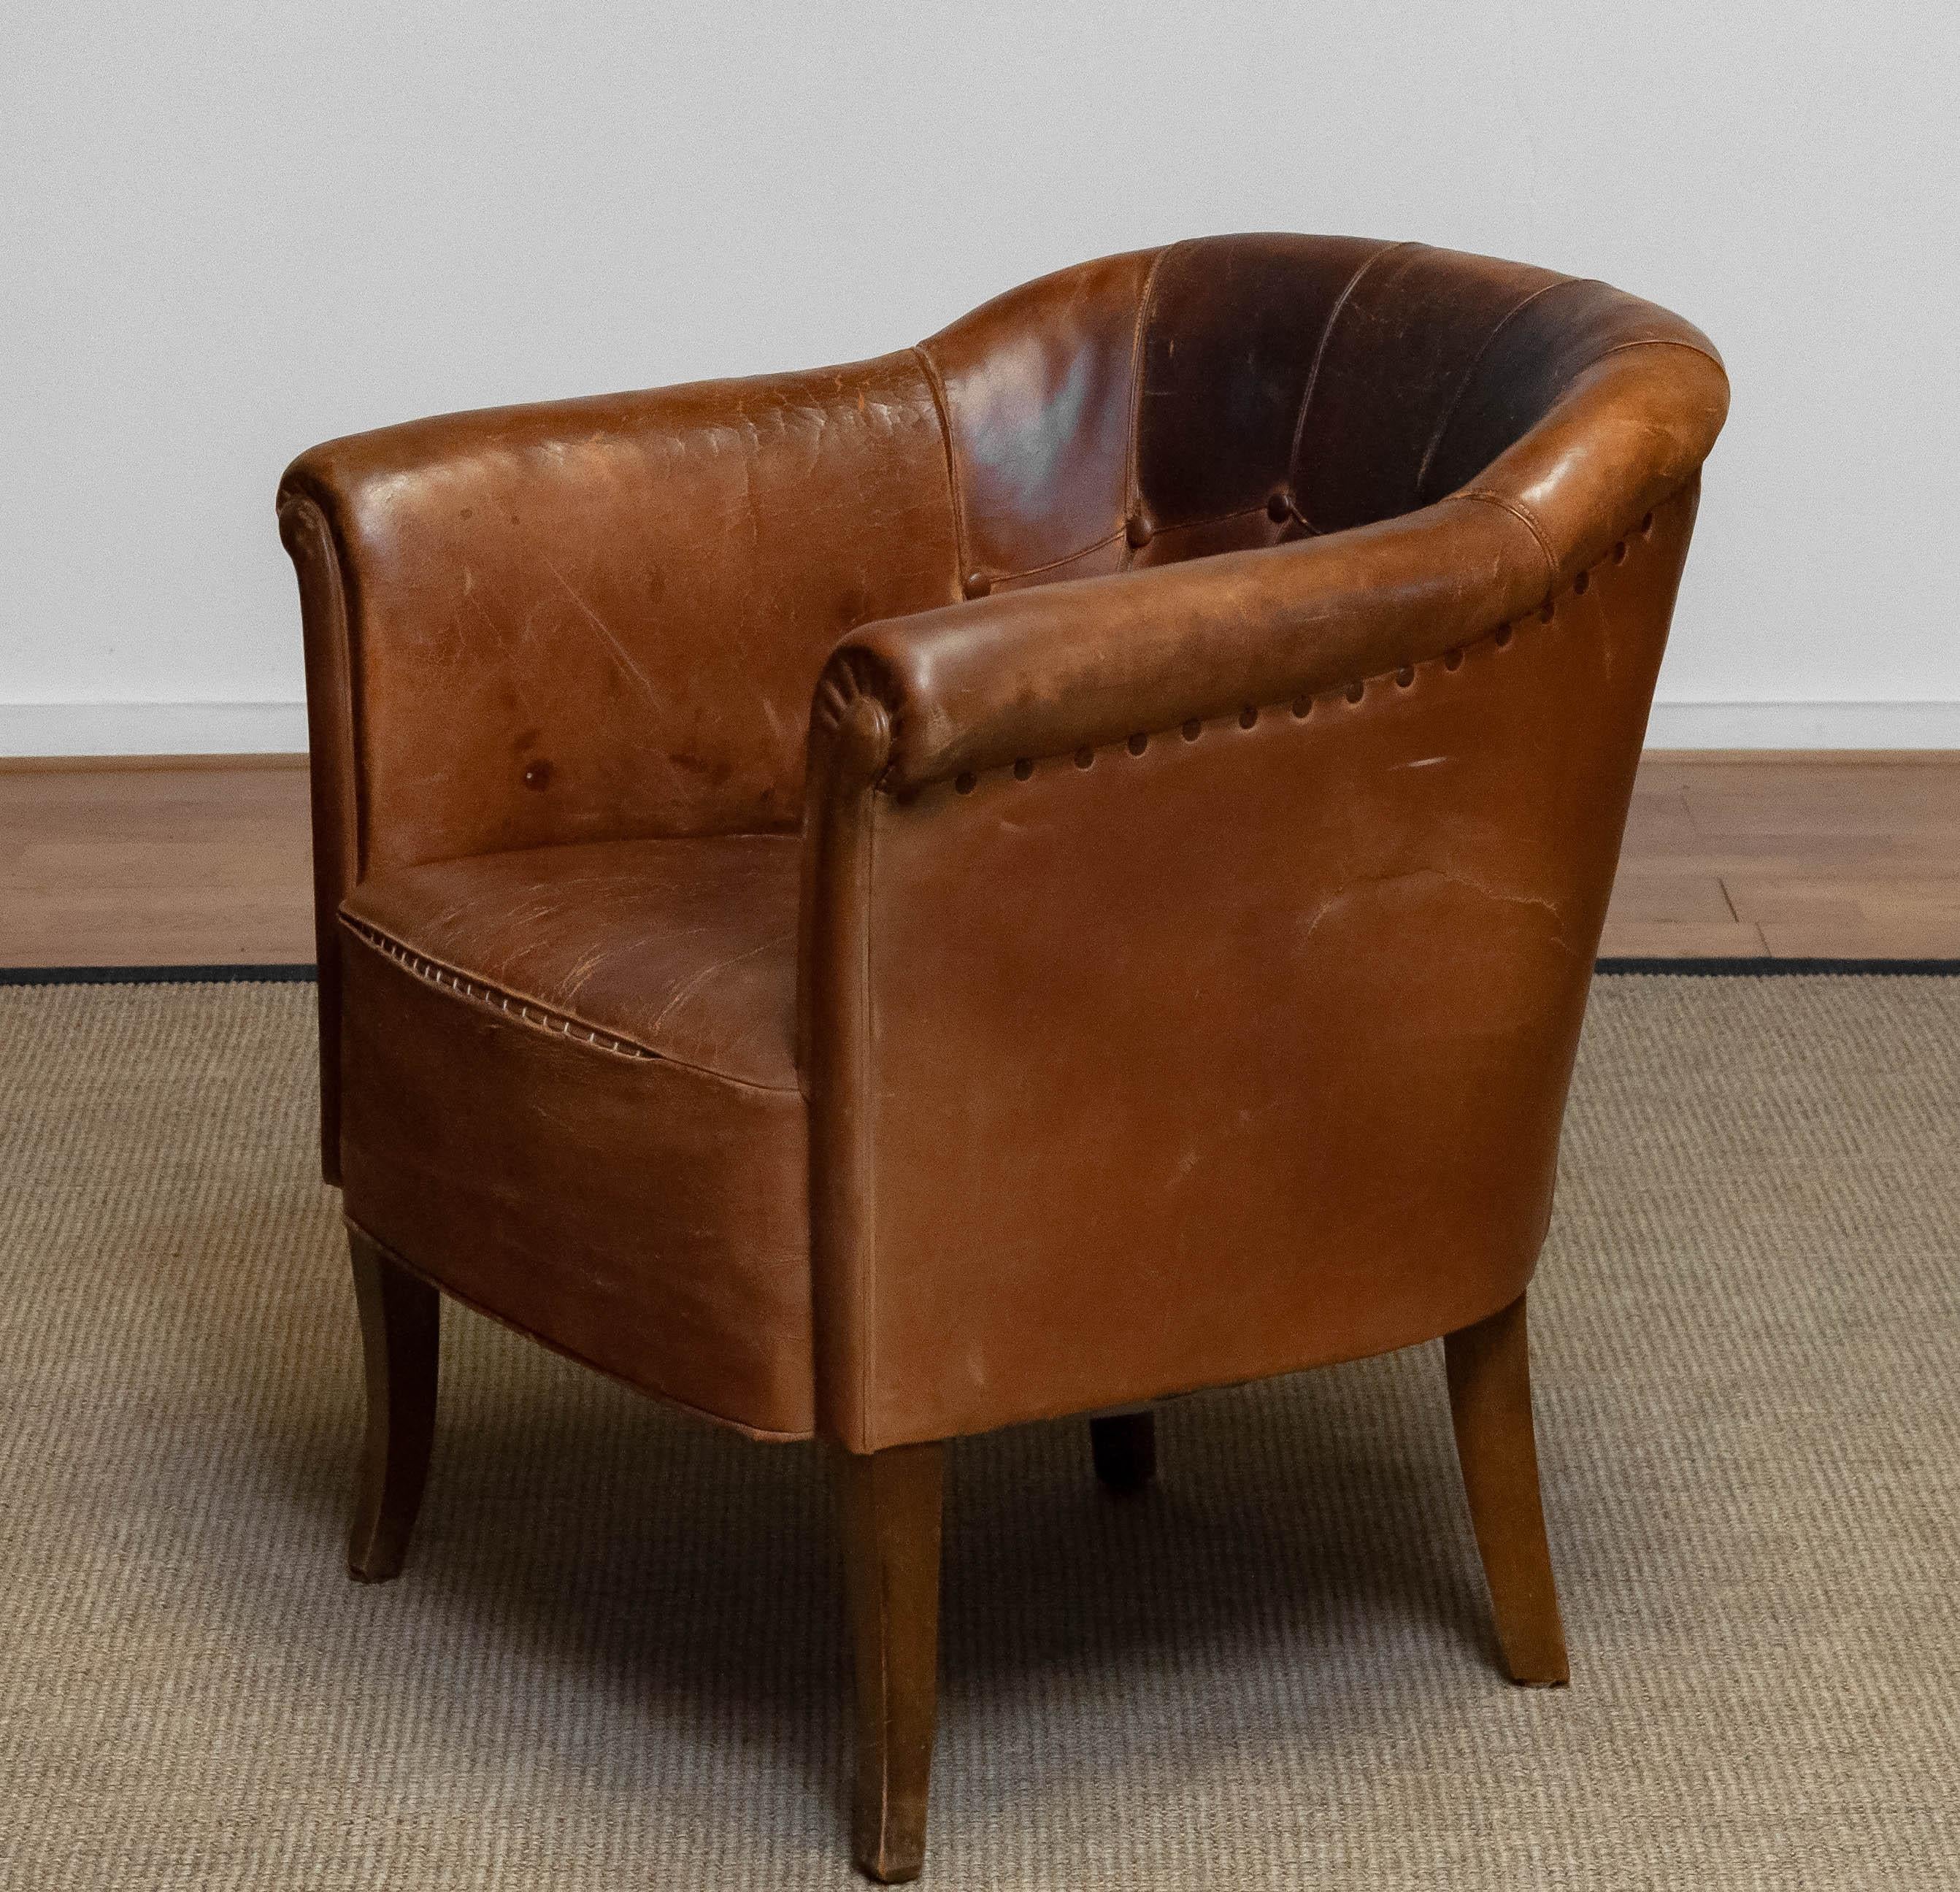 Absolutely unique and stunning authentic club / lounge / cigar chair from the 19th century made in Sweden.
The great vintage / antique patina gives the chair her absolutely unique and beautiful patina and makes this chair an absolute decorative 